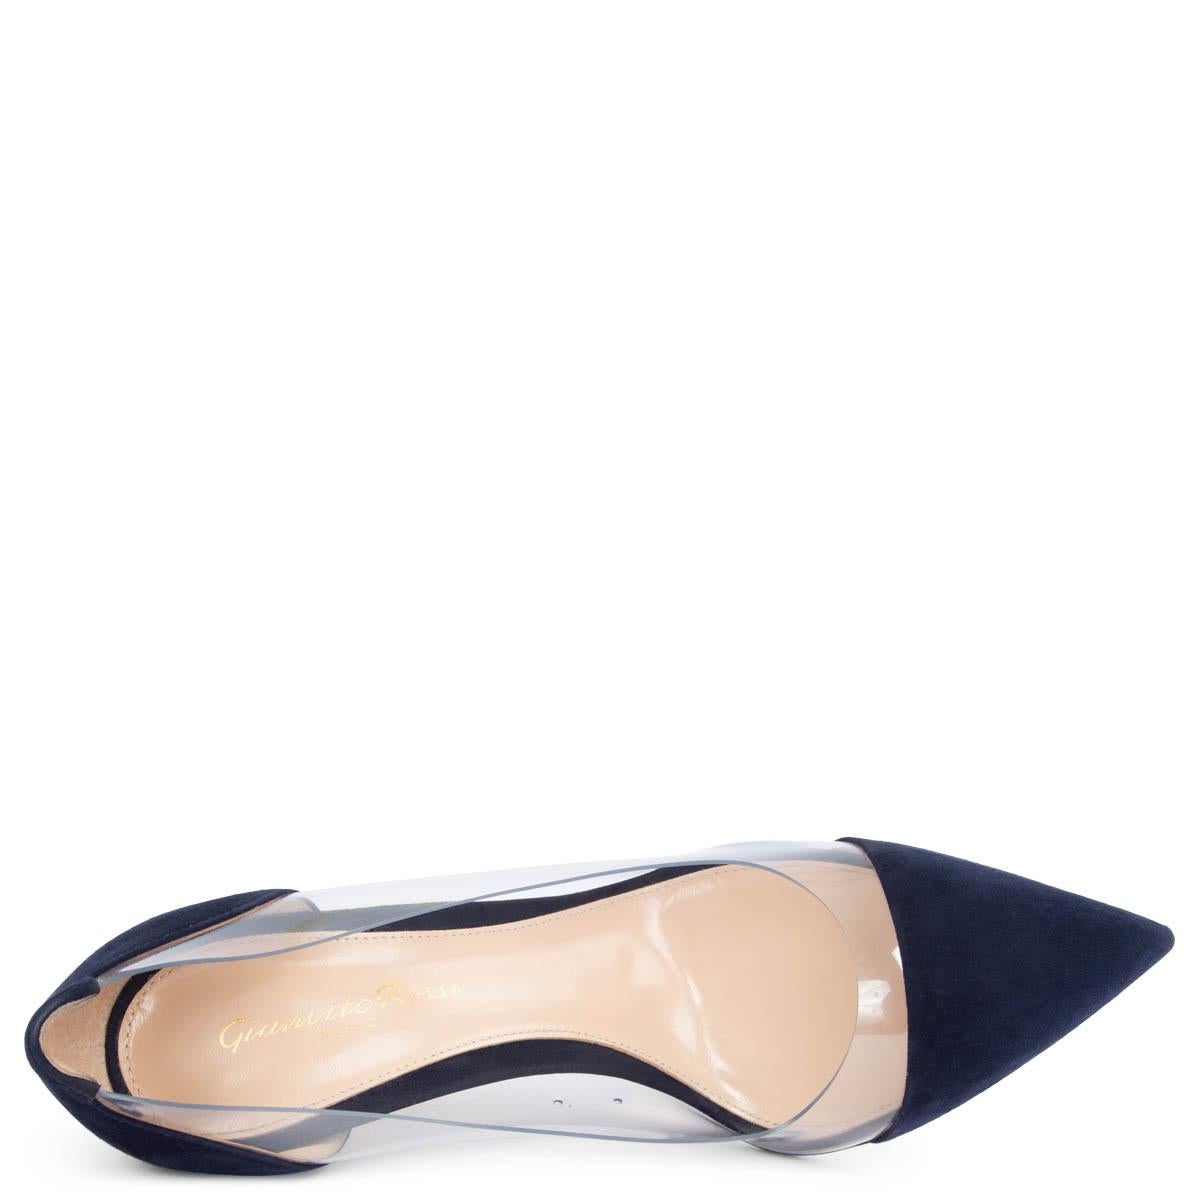 GIANVITO ROSSI navy blue suede PLEXI 105 Pumps Shoes 37 For Sale 2